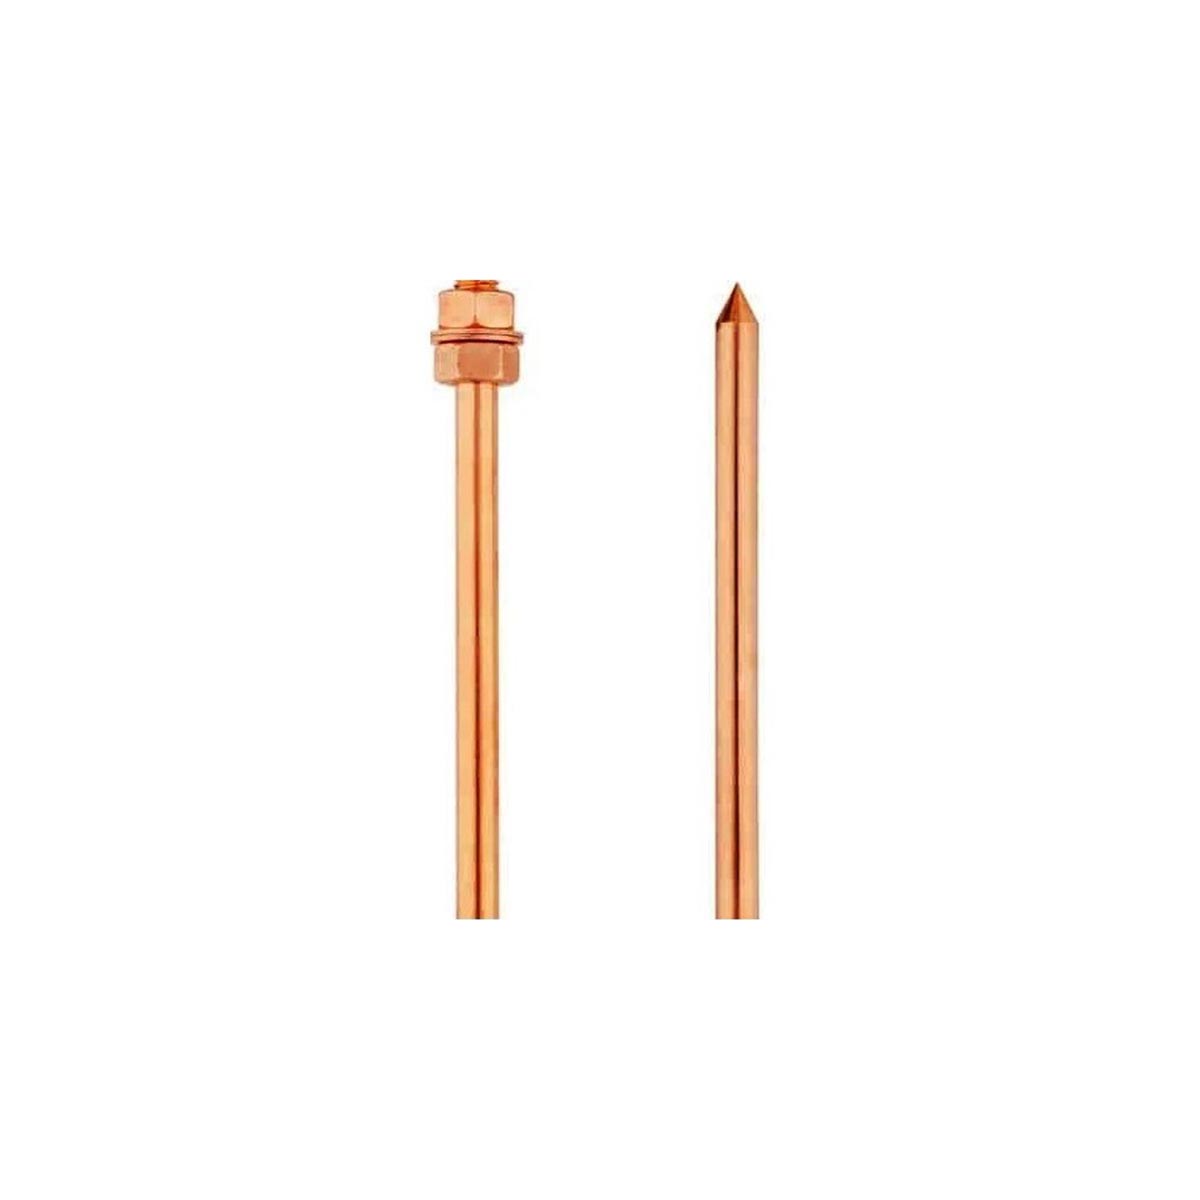 Nemtek Copper Earth Spike 1.2m with Nut and Washer Cloe Up View EF01-2